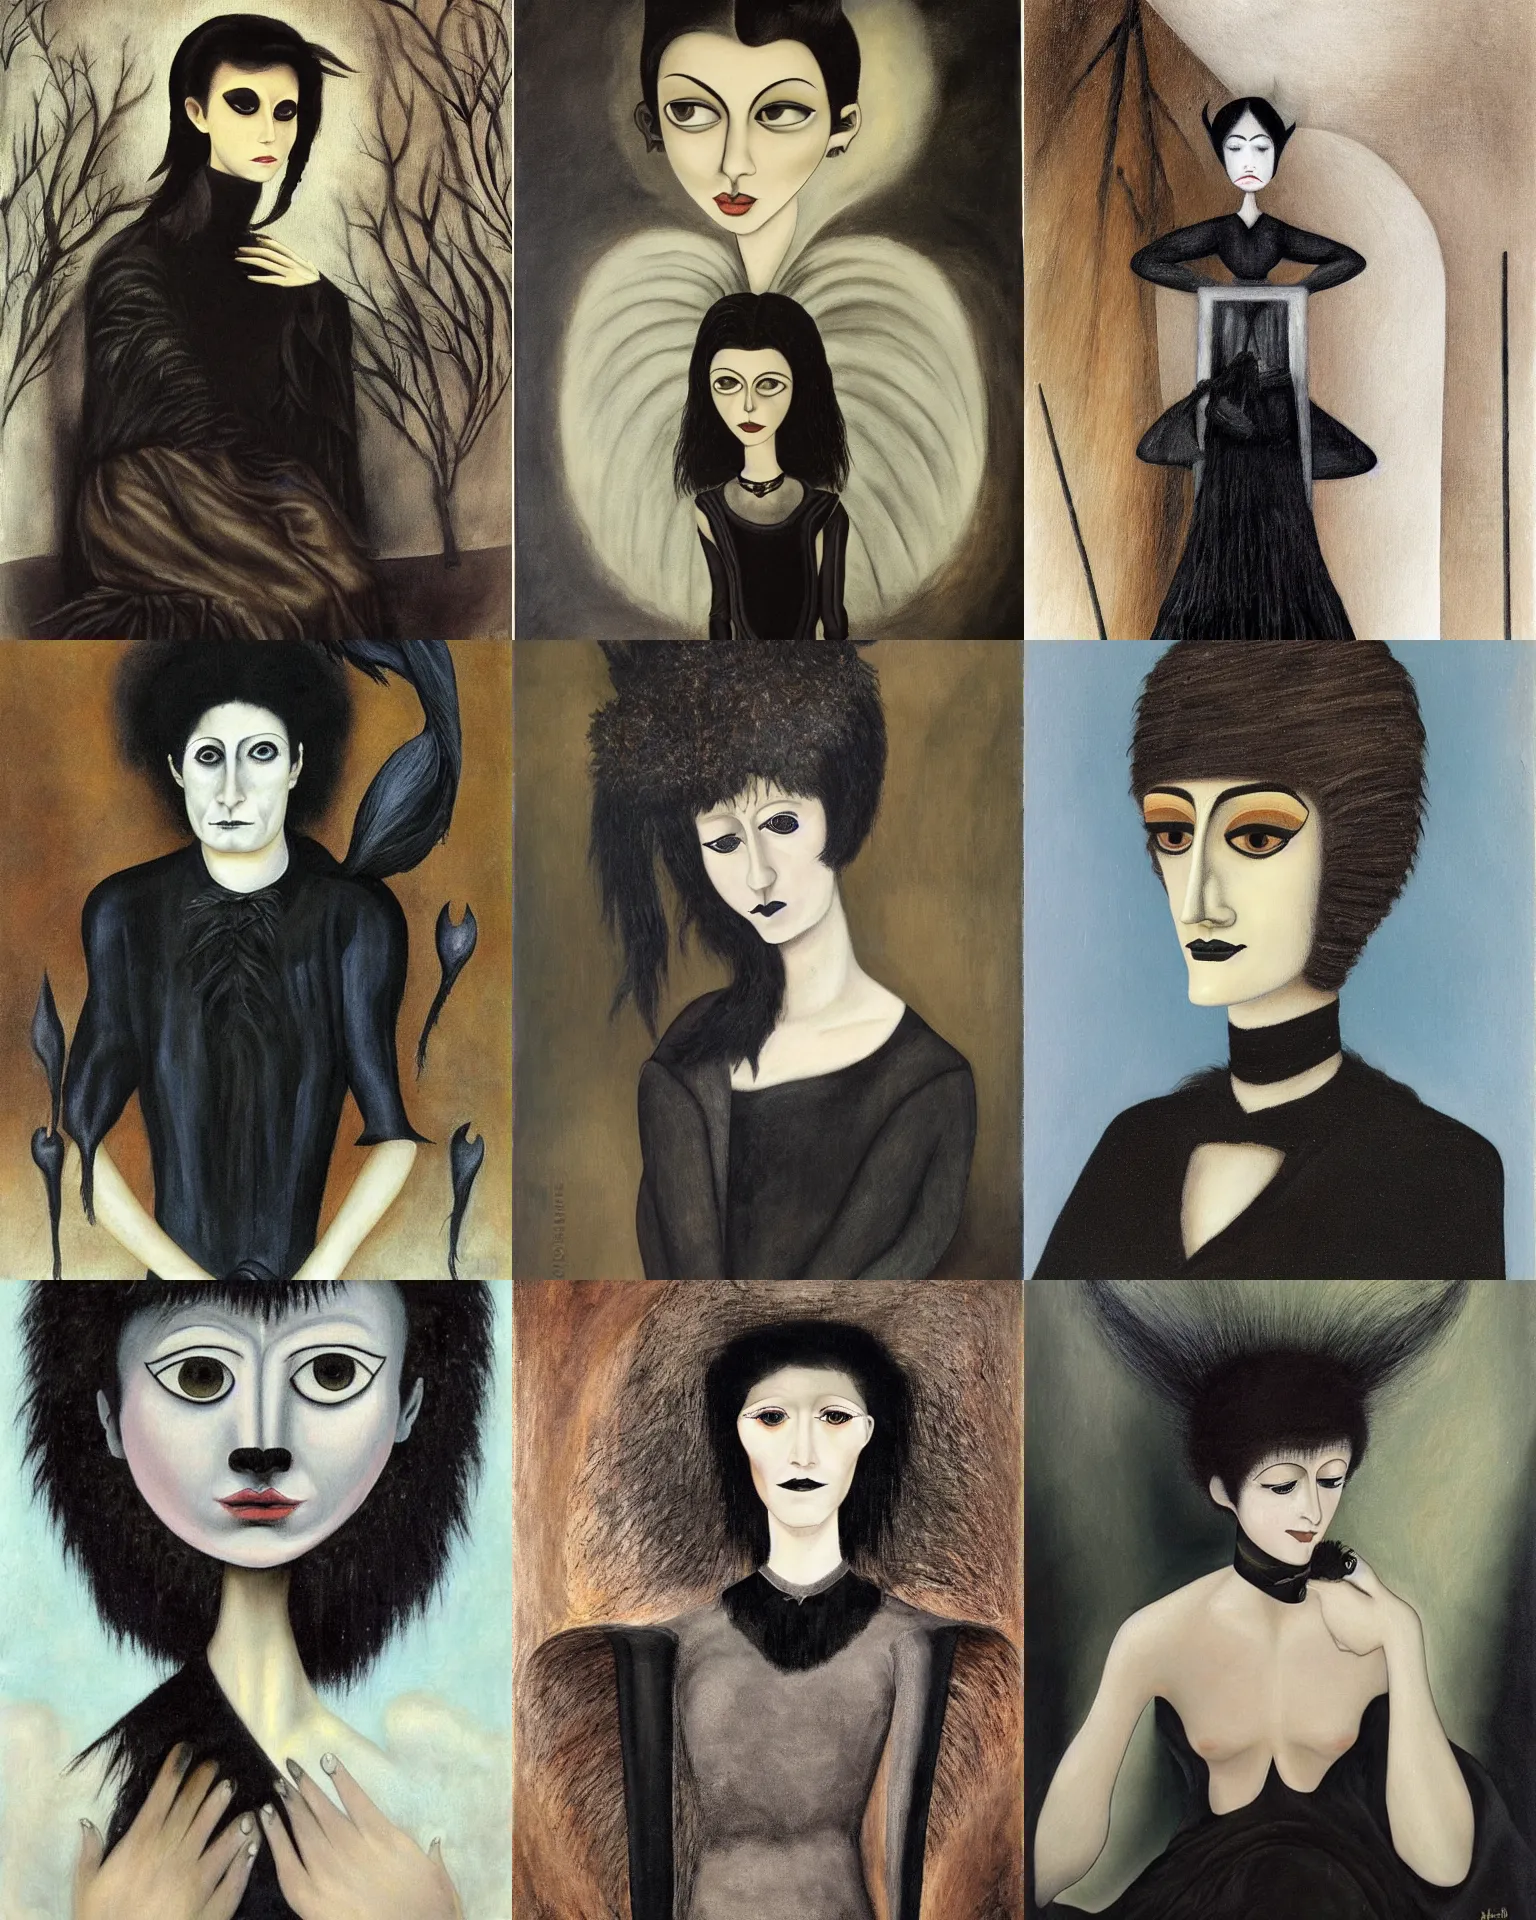 Prompt: A goth portrait painted by Remedios Varo. Her hair is dark brown and cut into a short, messy pixie cut. She has a slightly rounded face, with a pointed chin, large entirely-black eyes, and a small nose. She is wearing a black tank top, a black leather jacket, a black knee-length skirt, a black choker, and black leather boots.